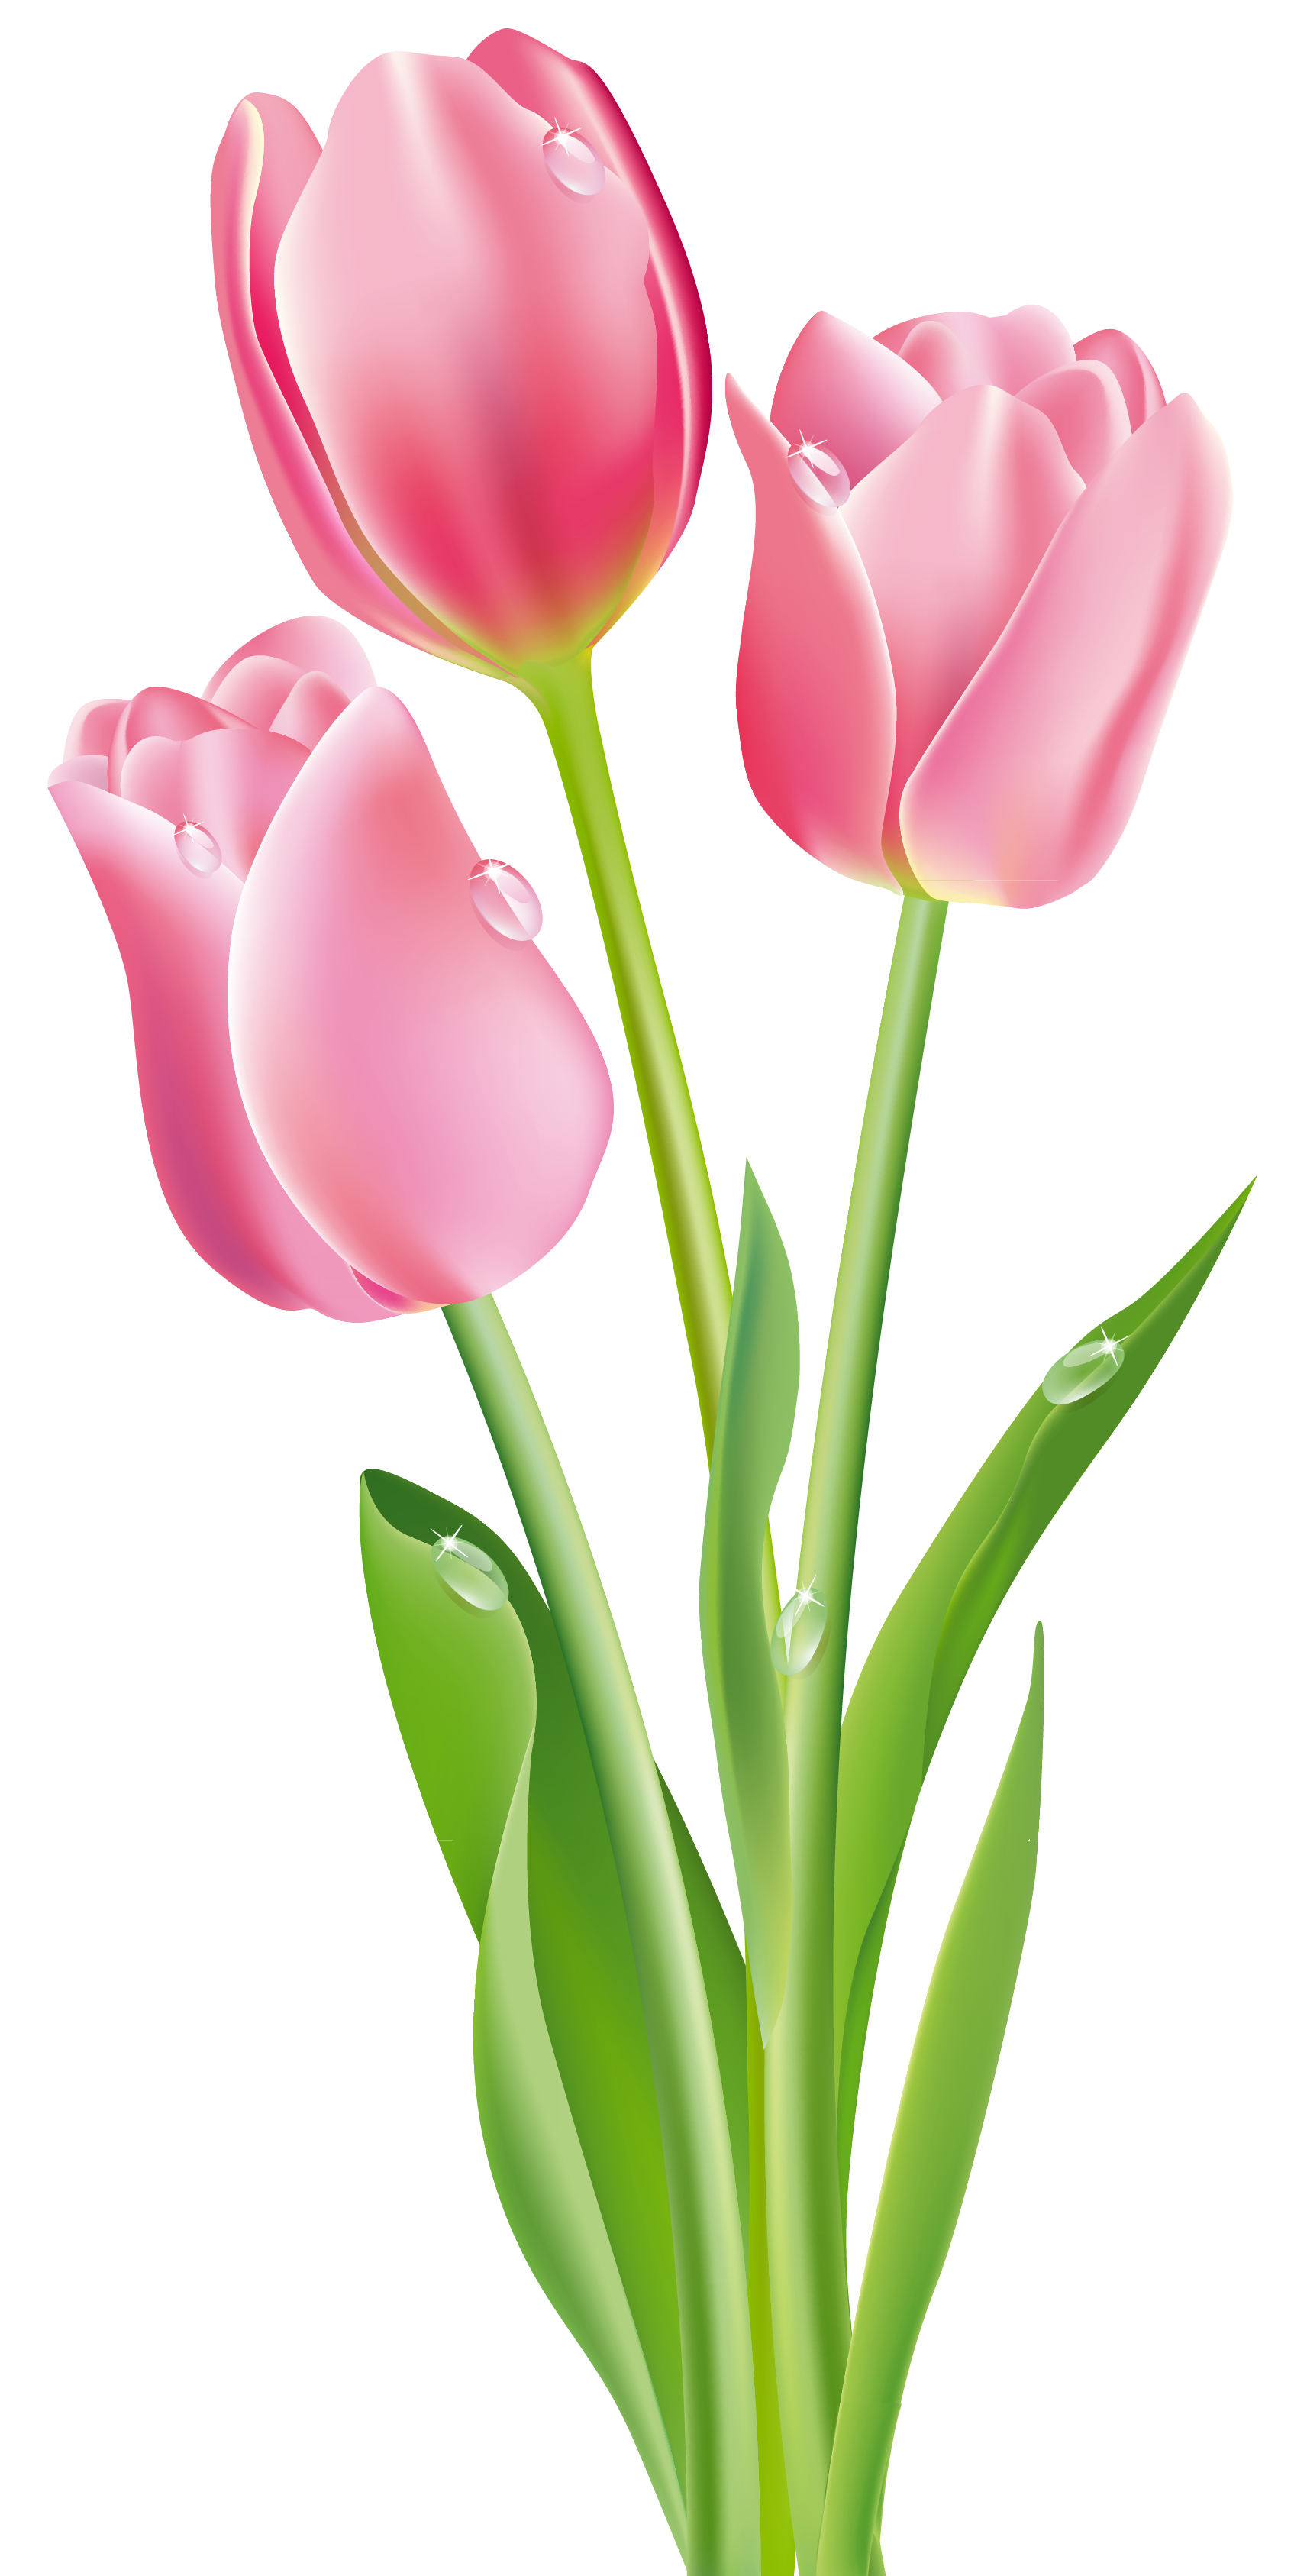 Pink Tulips PNG Clipart Image | Gallery Yopriceville - High-Quality ...